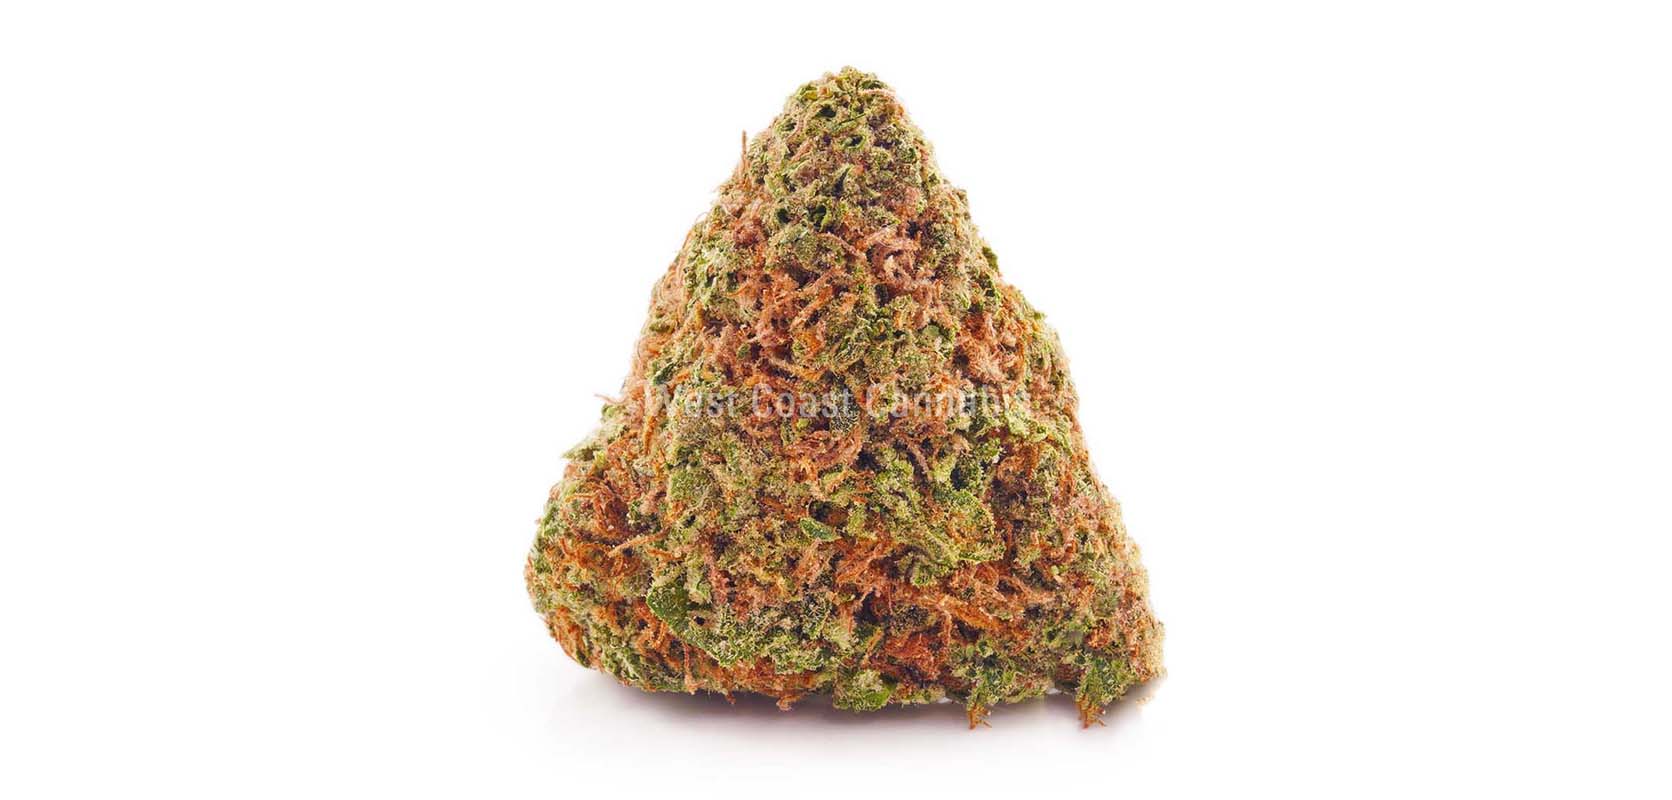 Cherry Pie weed online Canada. Buy dispensary weed from mail order marijuana weed store west coast cannabis.